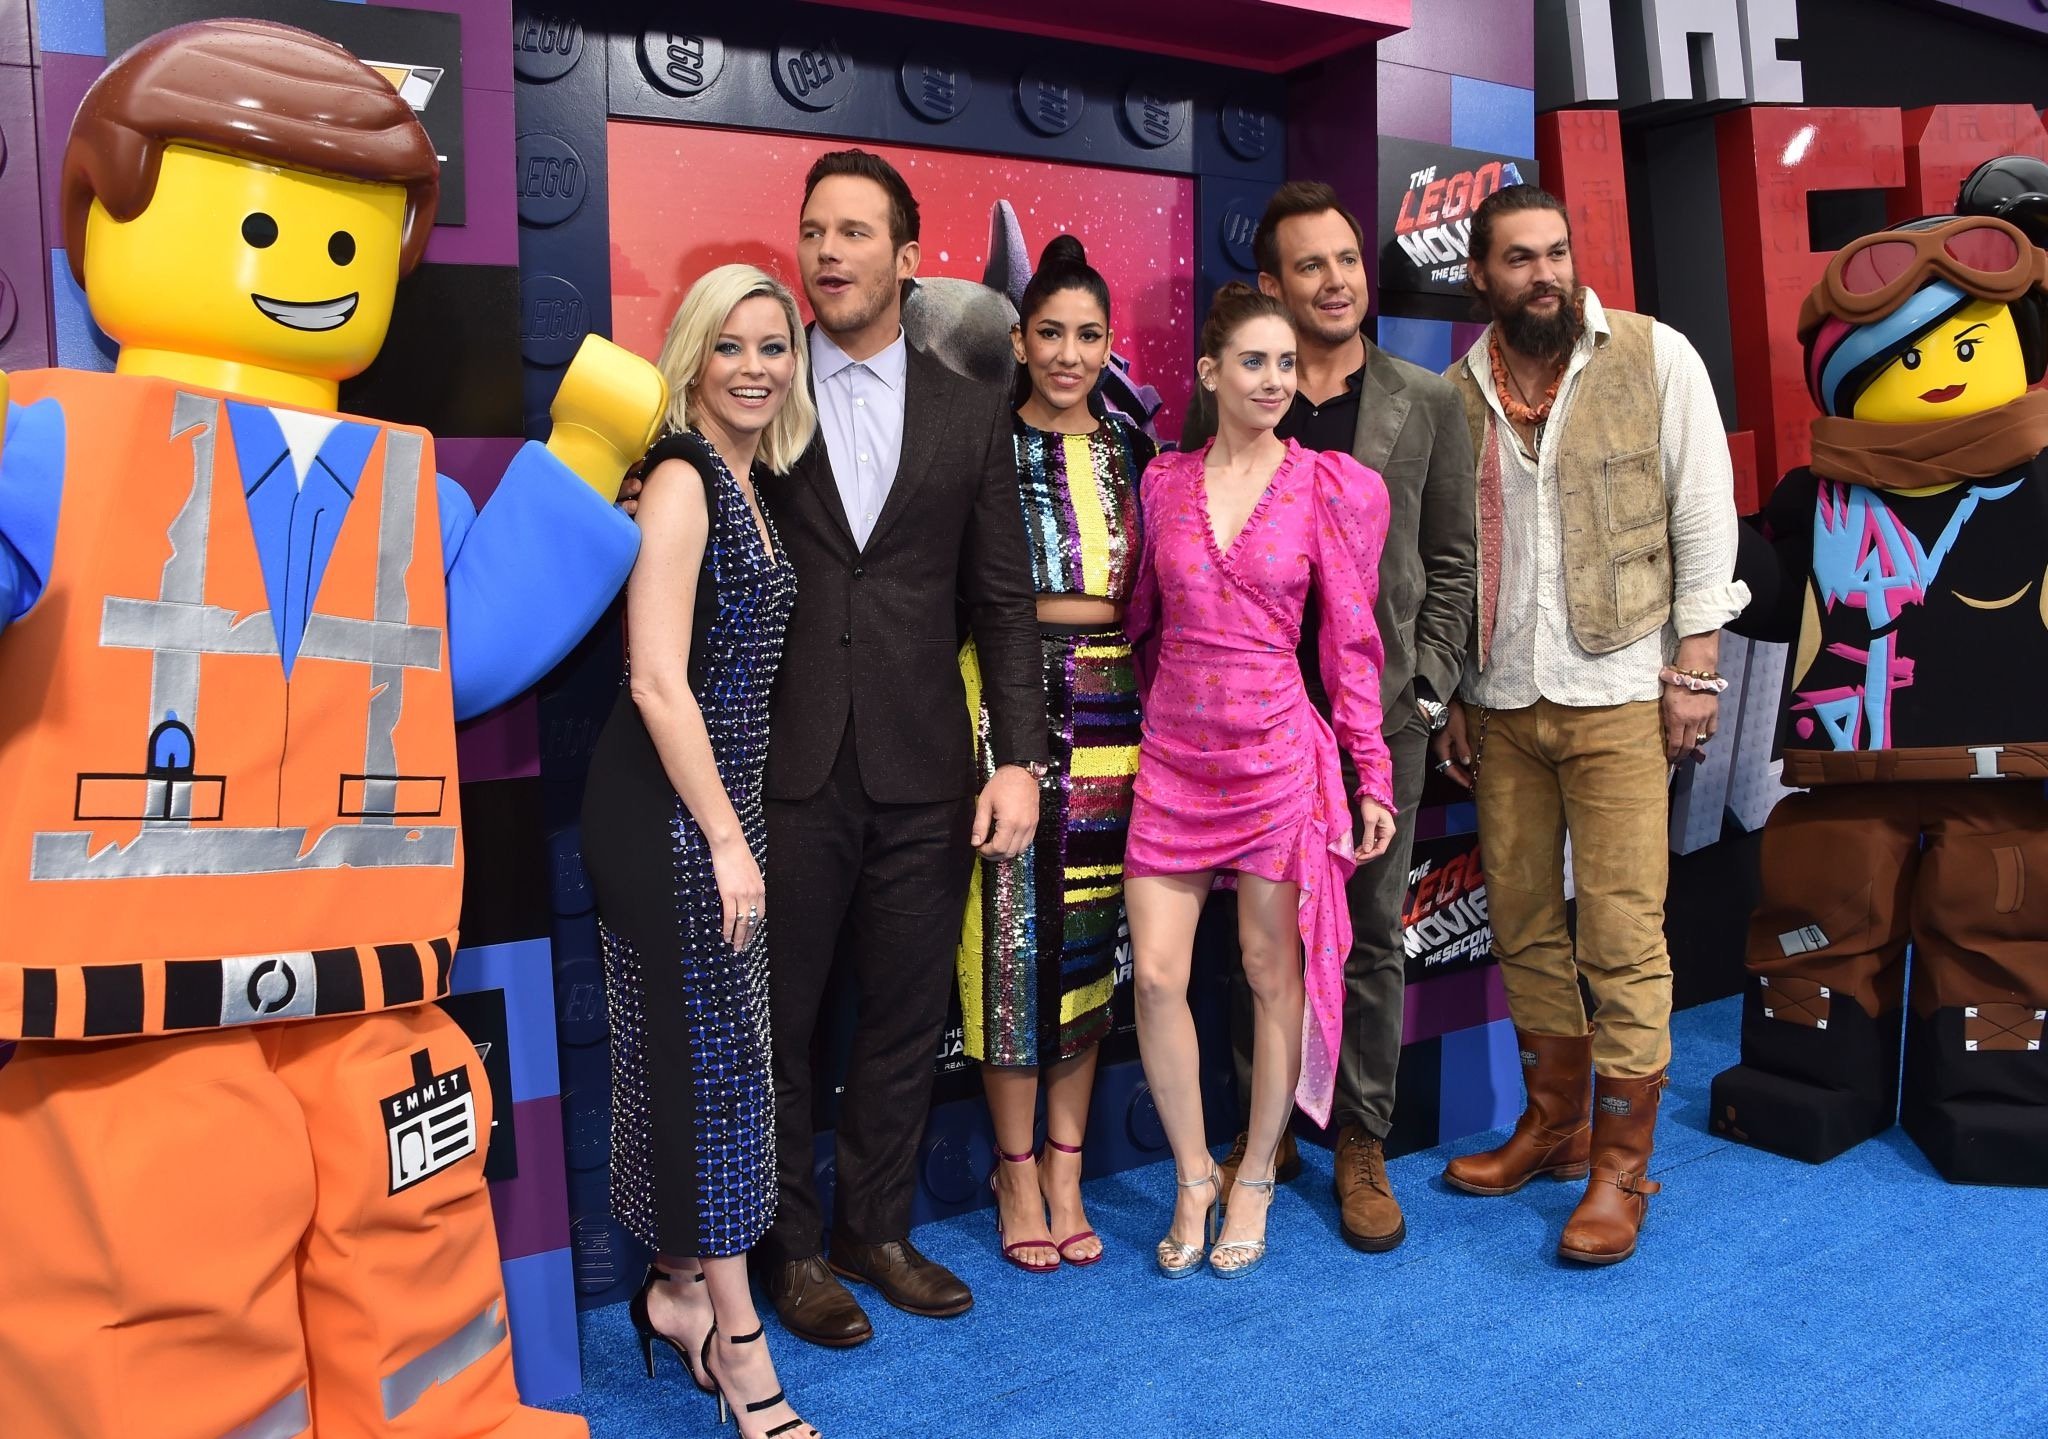 præsentation margen køre Brooklyn 99 Updates on Twitter: "PHOTOS l The Lego Movie 2 cast at the  premiere (Via @badpostandy) https://t.co/z3o3sXahyq" / Twitter